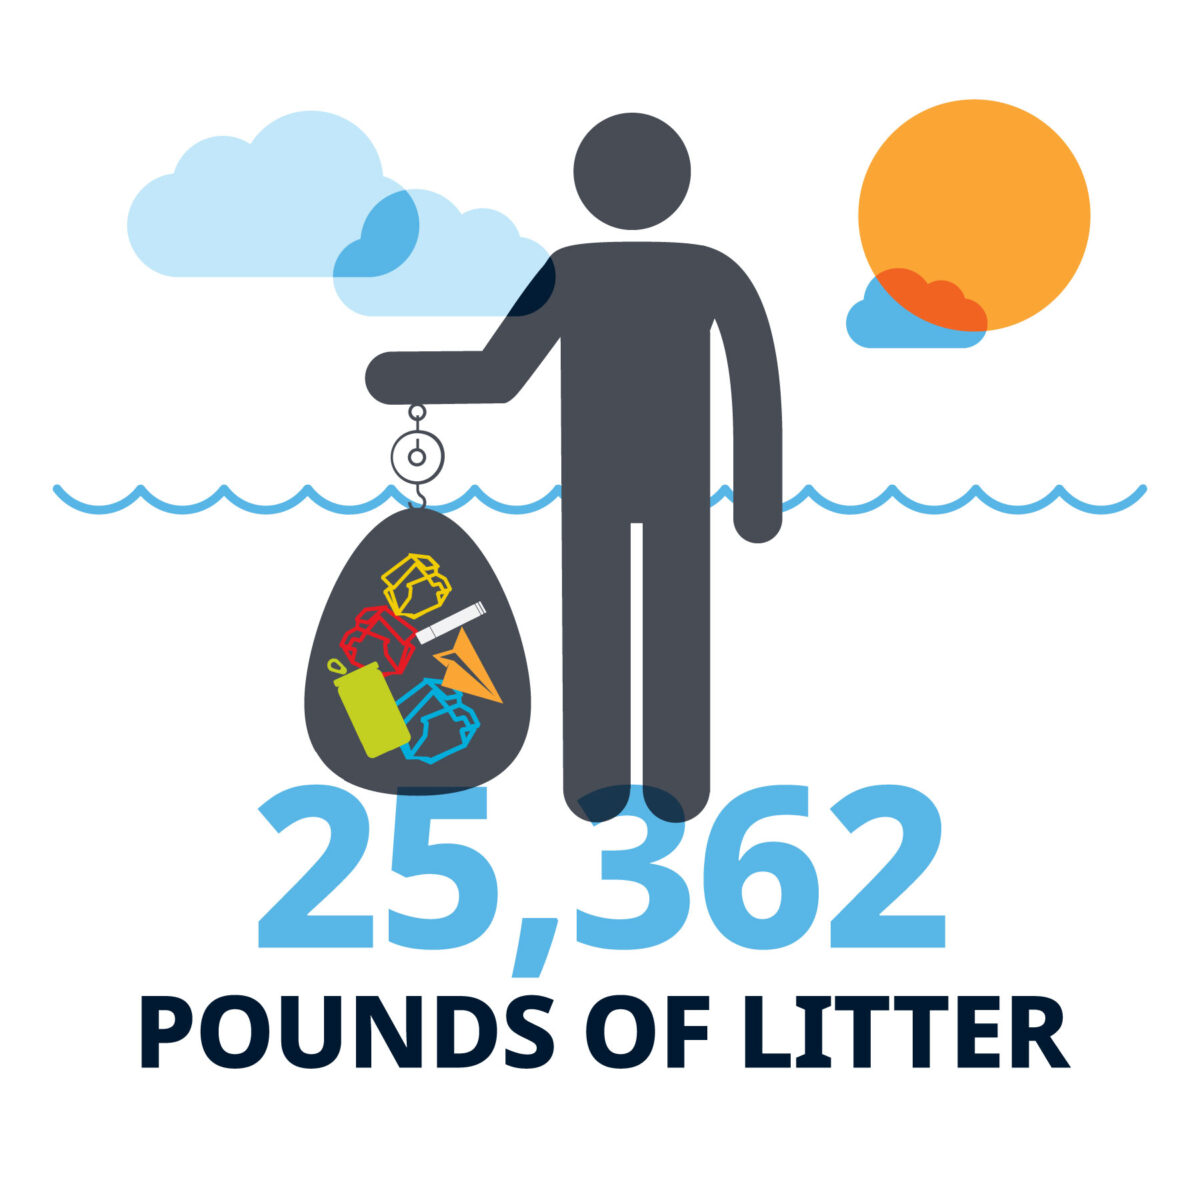 25,362 pounds of litter.